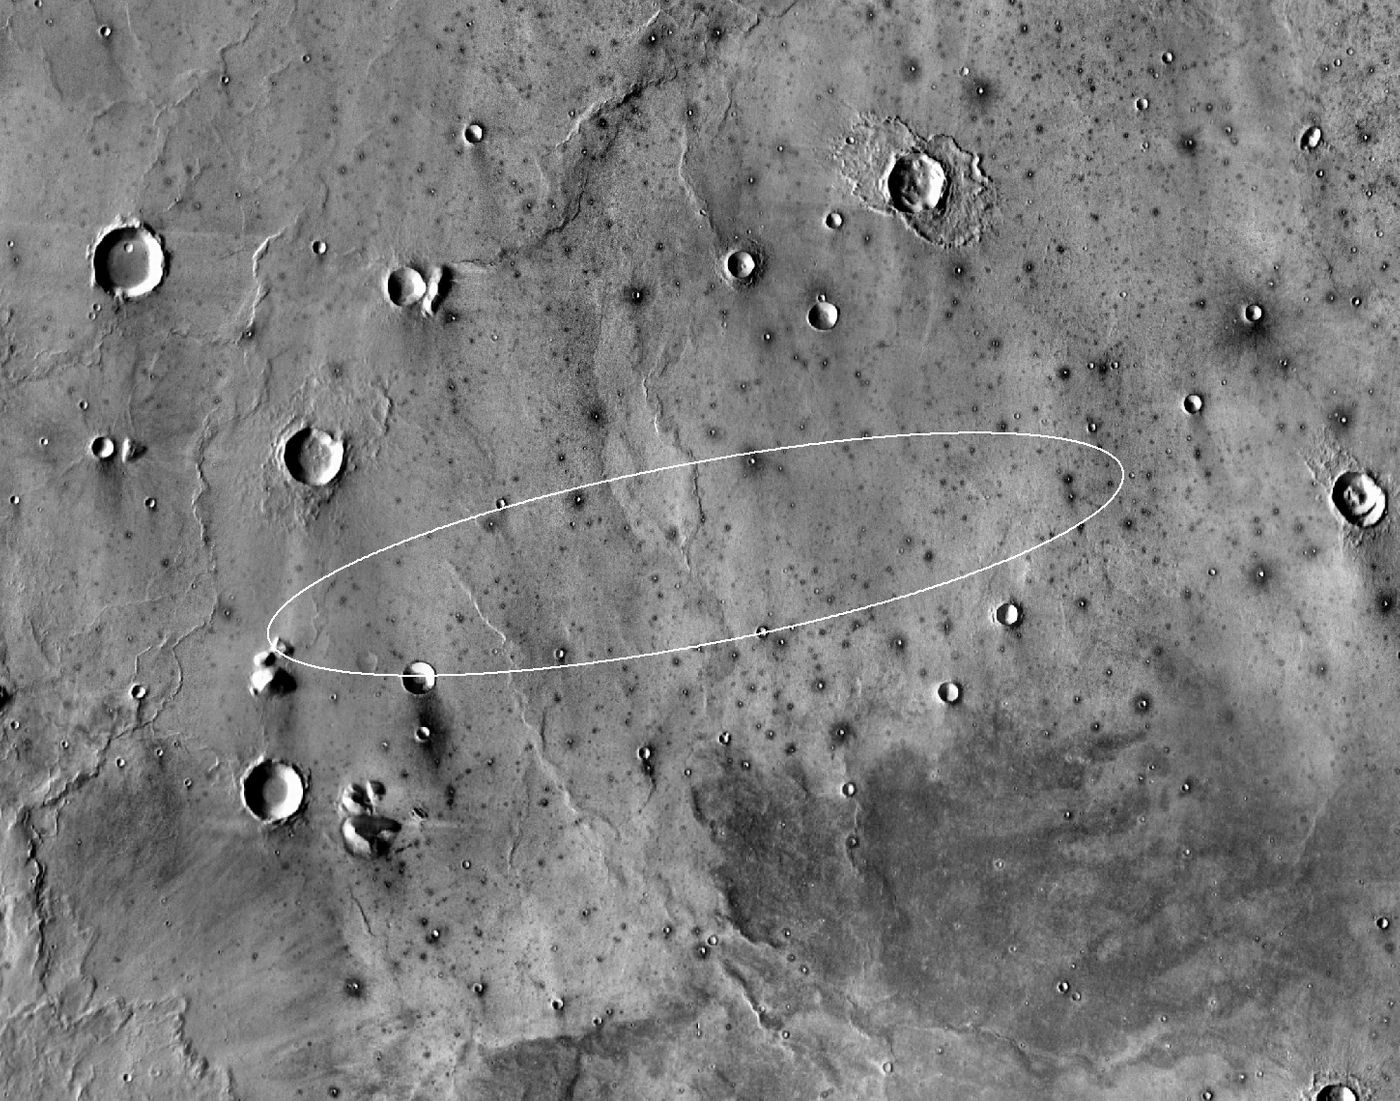 The circled region, known as Elysium Planitia, is where NASA expects to land the InSight mission later this month.